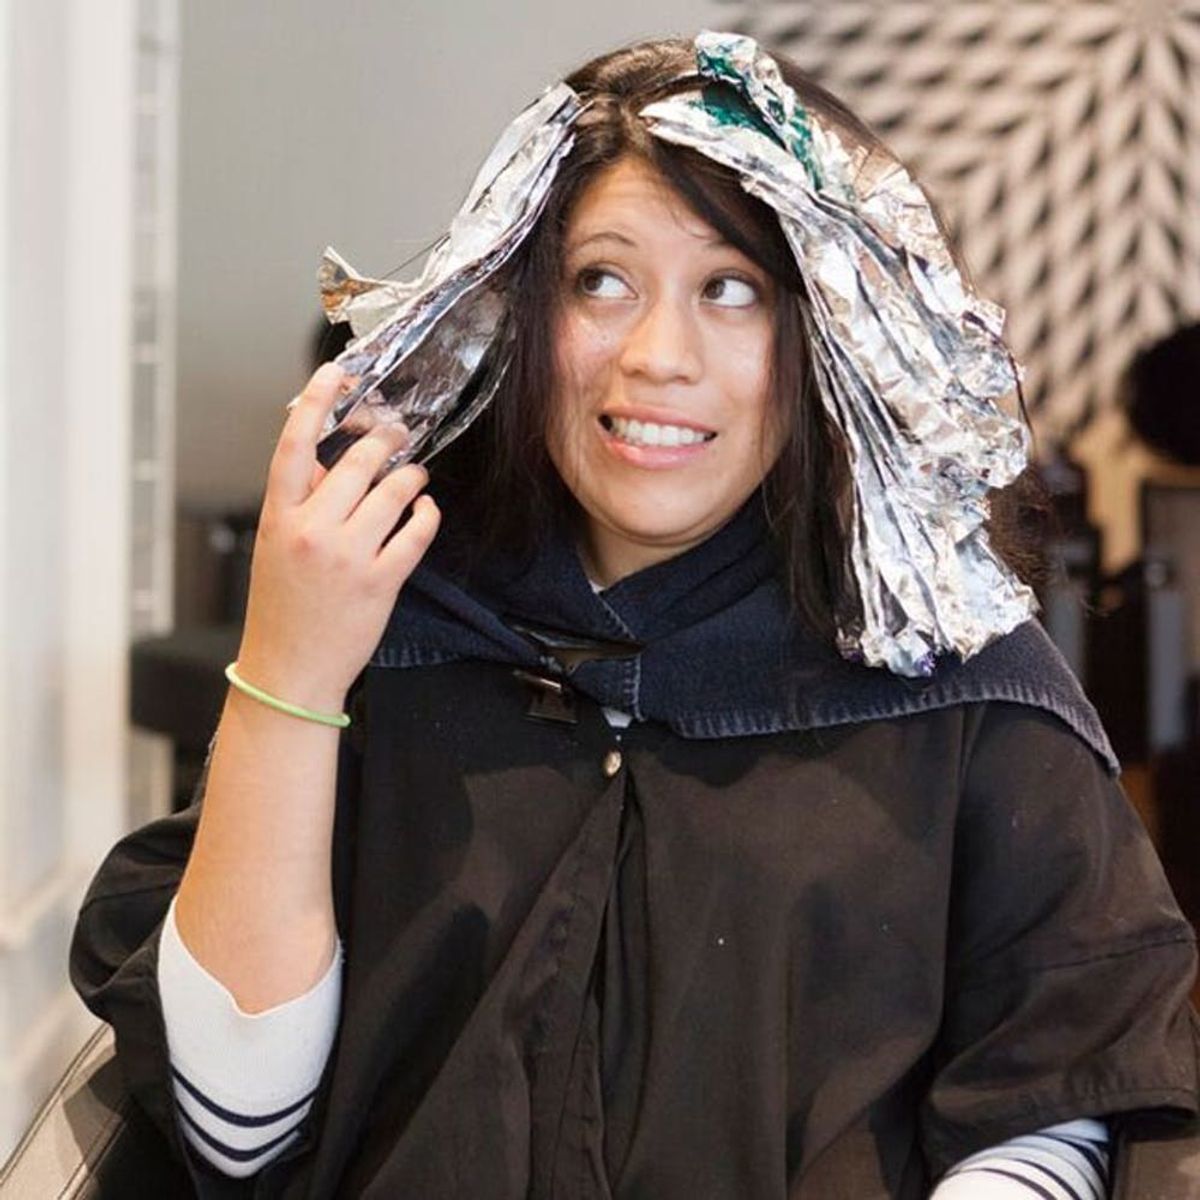 14 Women Reveal Their Most Traumatic + Hilarious Hair Stories